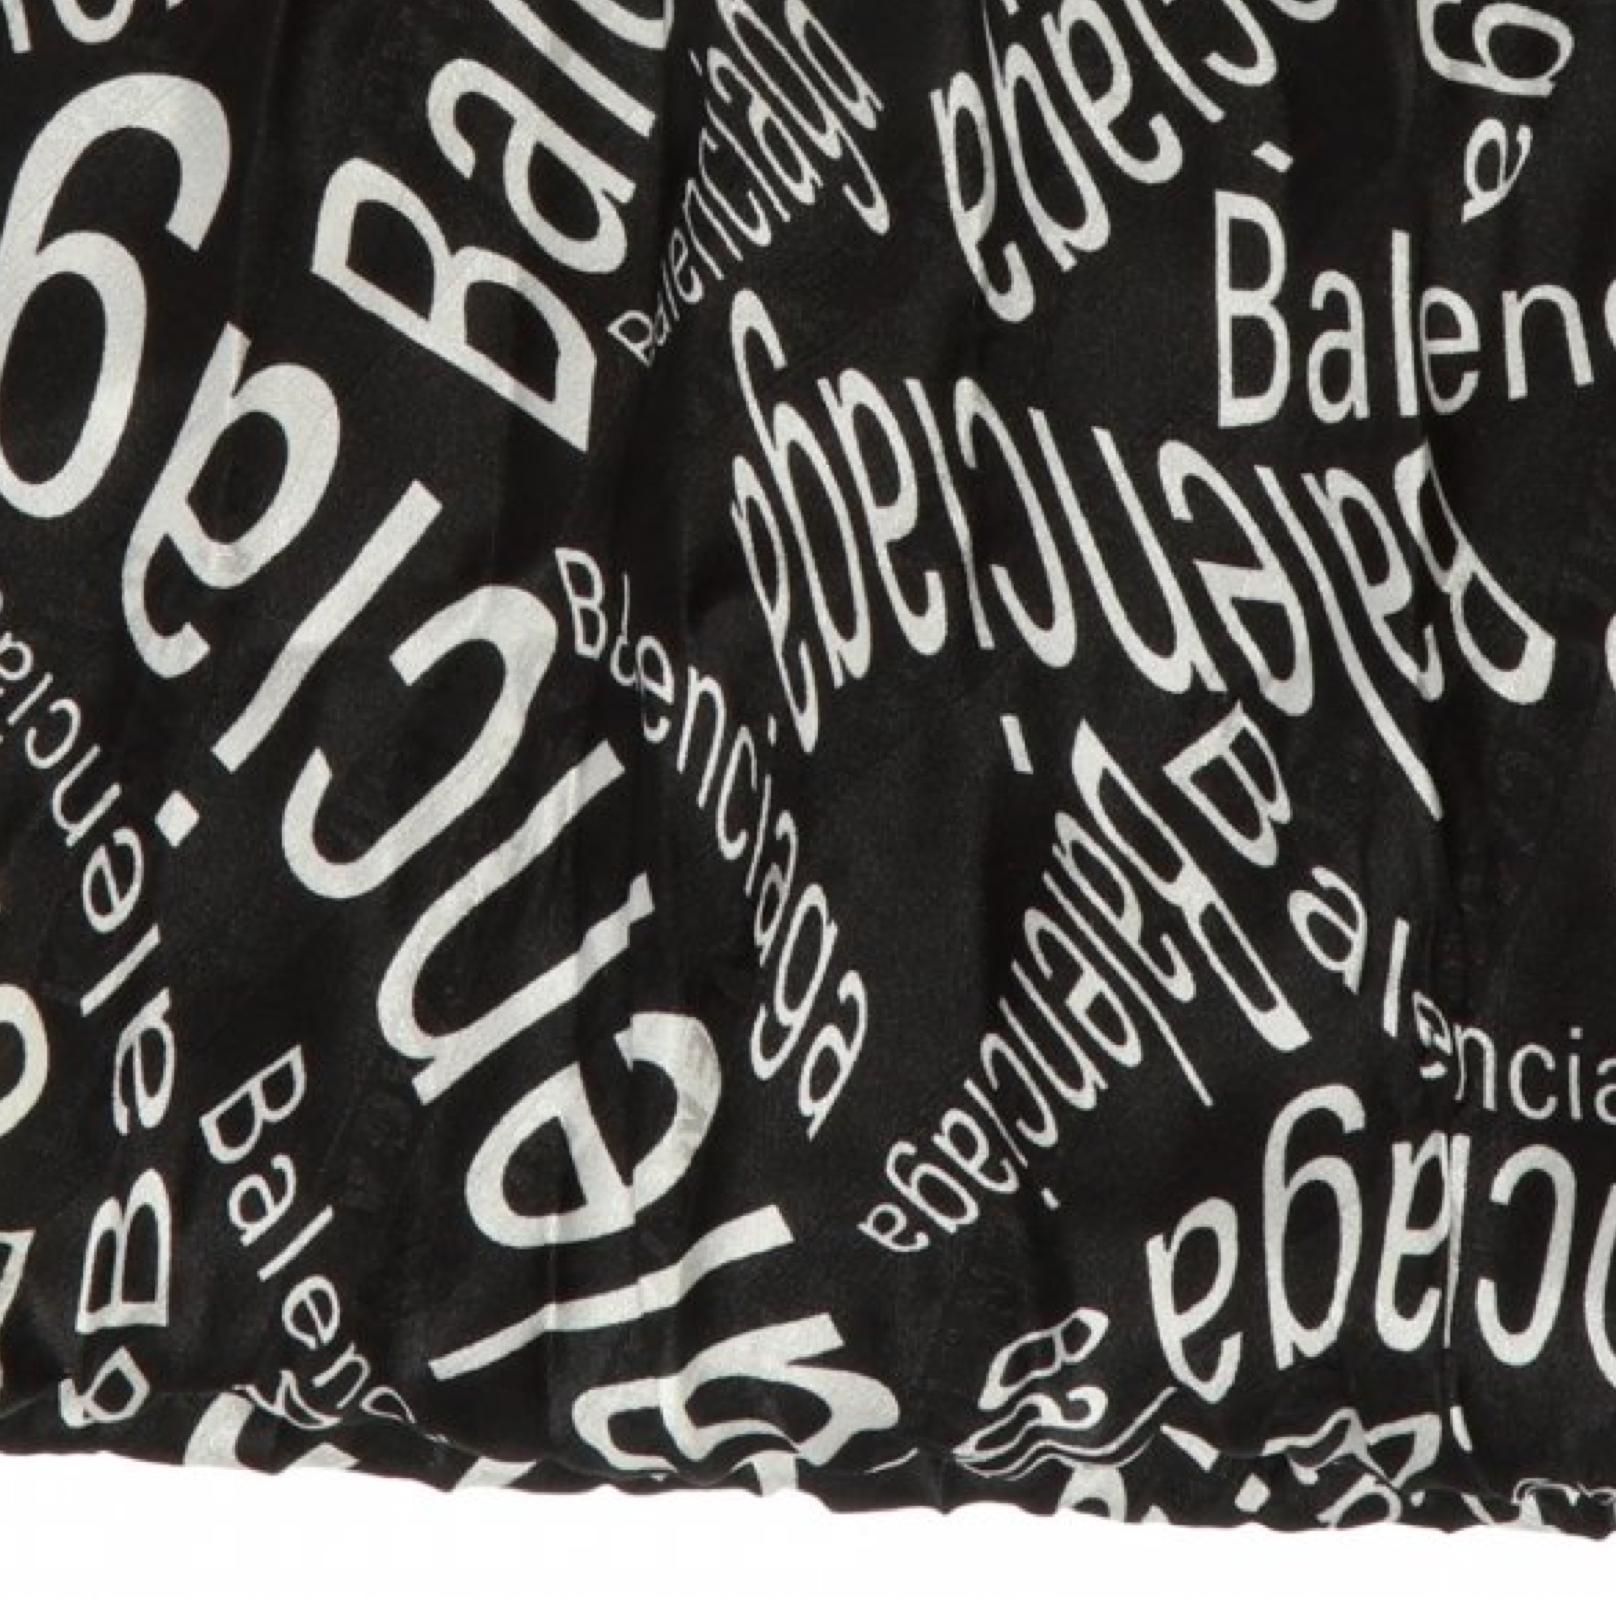 Black scarf from Balenciaga. Made of silk. Decorated with an embroidered and printed logo pattern in white and neon green.

COLOR: Lemon/black
MATERIAL: Silk
ITEM CODE: 576157
MEASUREMS: 70 x 200 cm
CONDITION: Brand new

Made in Italy